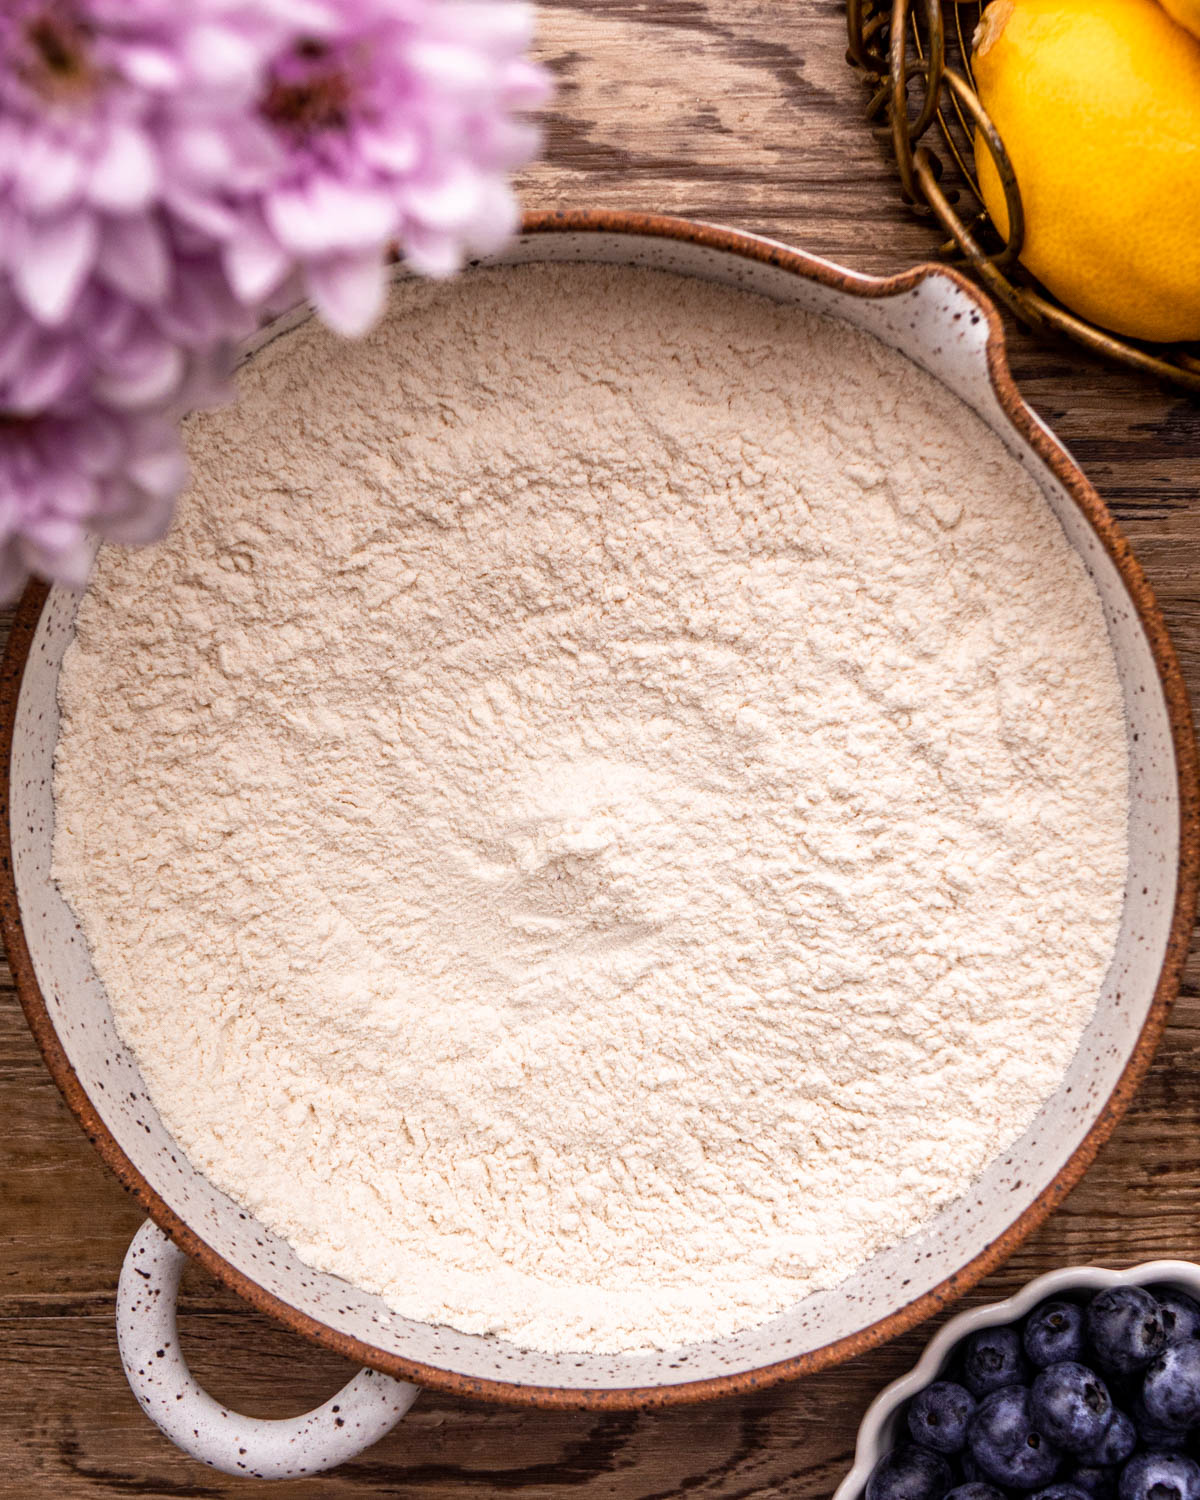 all purpose flour, baking powder, baking soda and salt whisked together in a pottery bowl